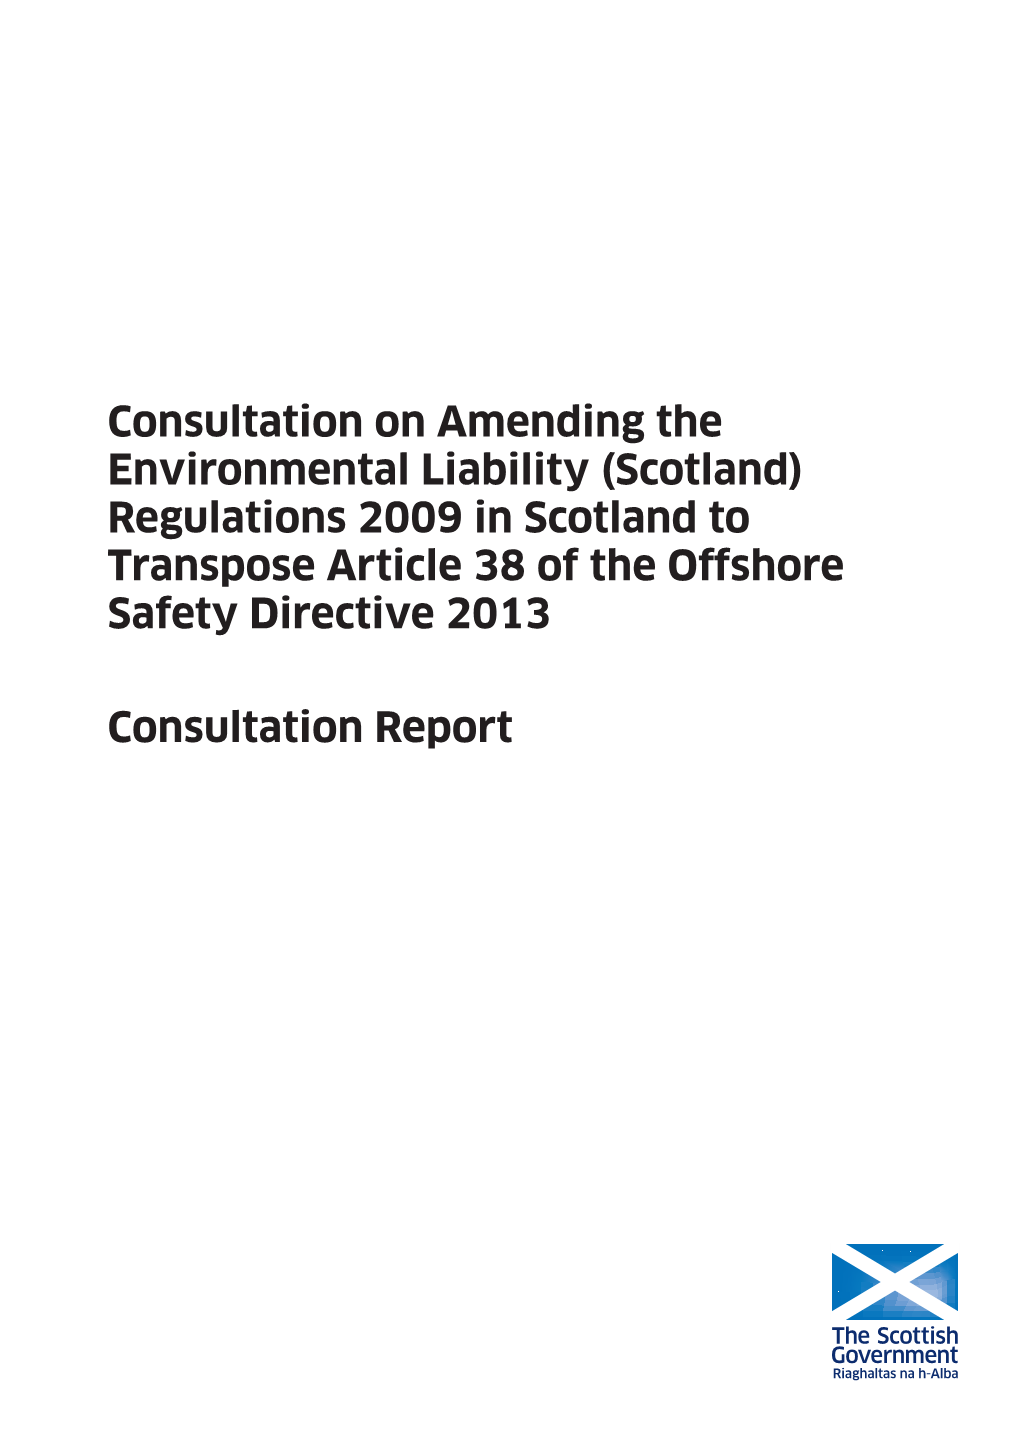 Consultation on Amending the Environmental Liability (Scotland) Regulations 2009 in Scotland to Transpose Article 38 of the Offshore Safety Directive 2013